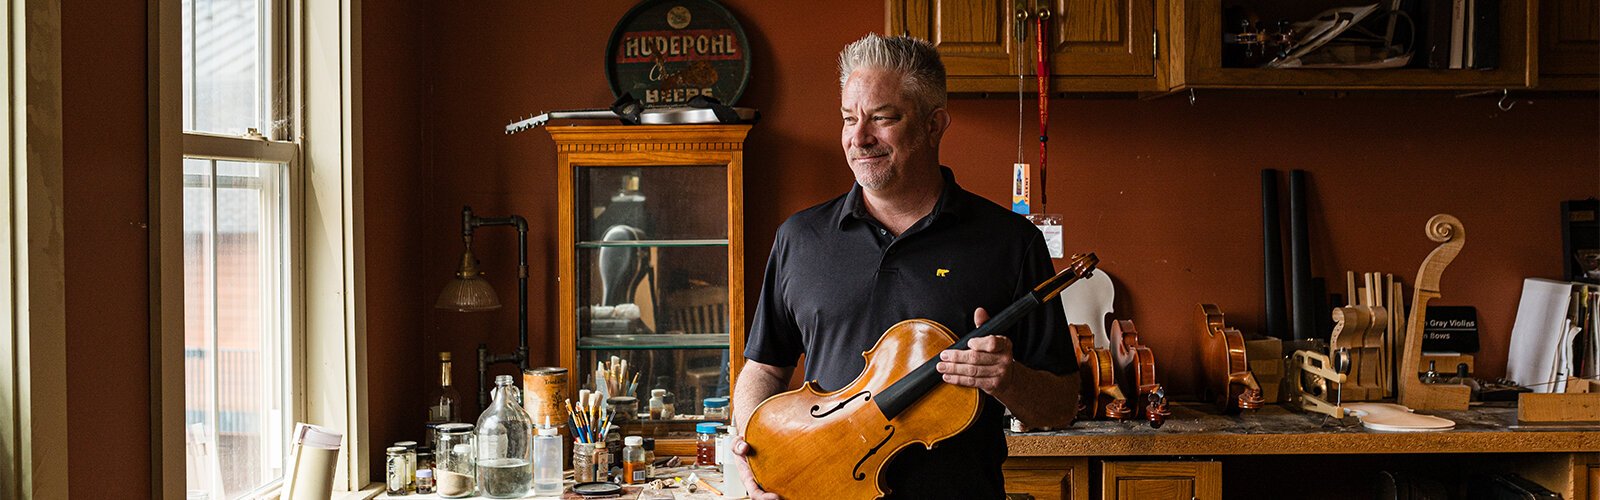 Damon Gray still builds violins, violas, and cellos out of the small, homey workshop and studio behind his house in Prospect Hill.